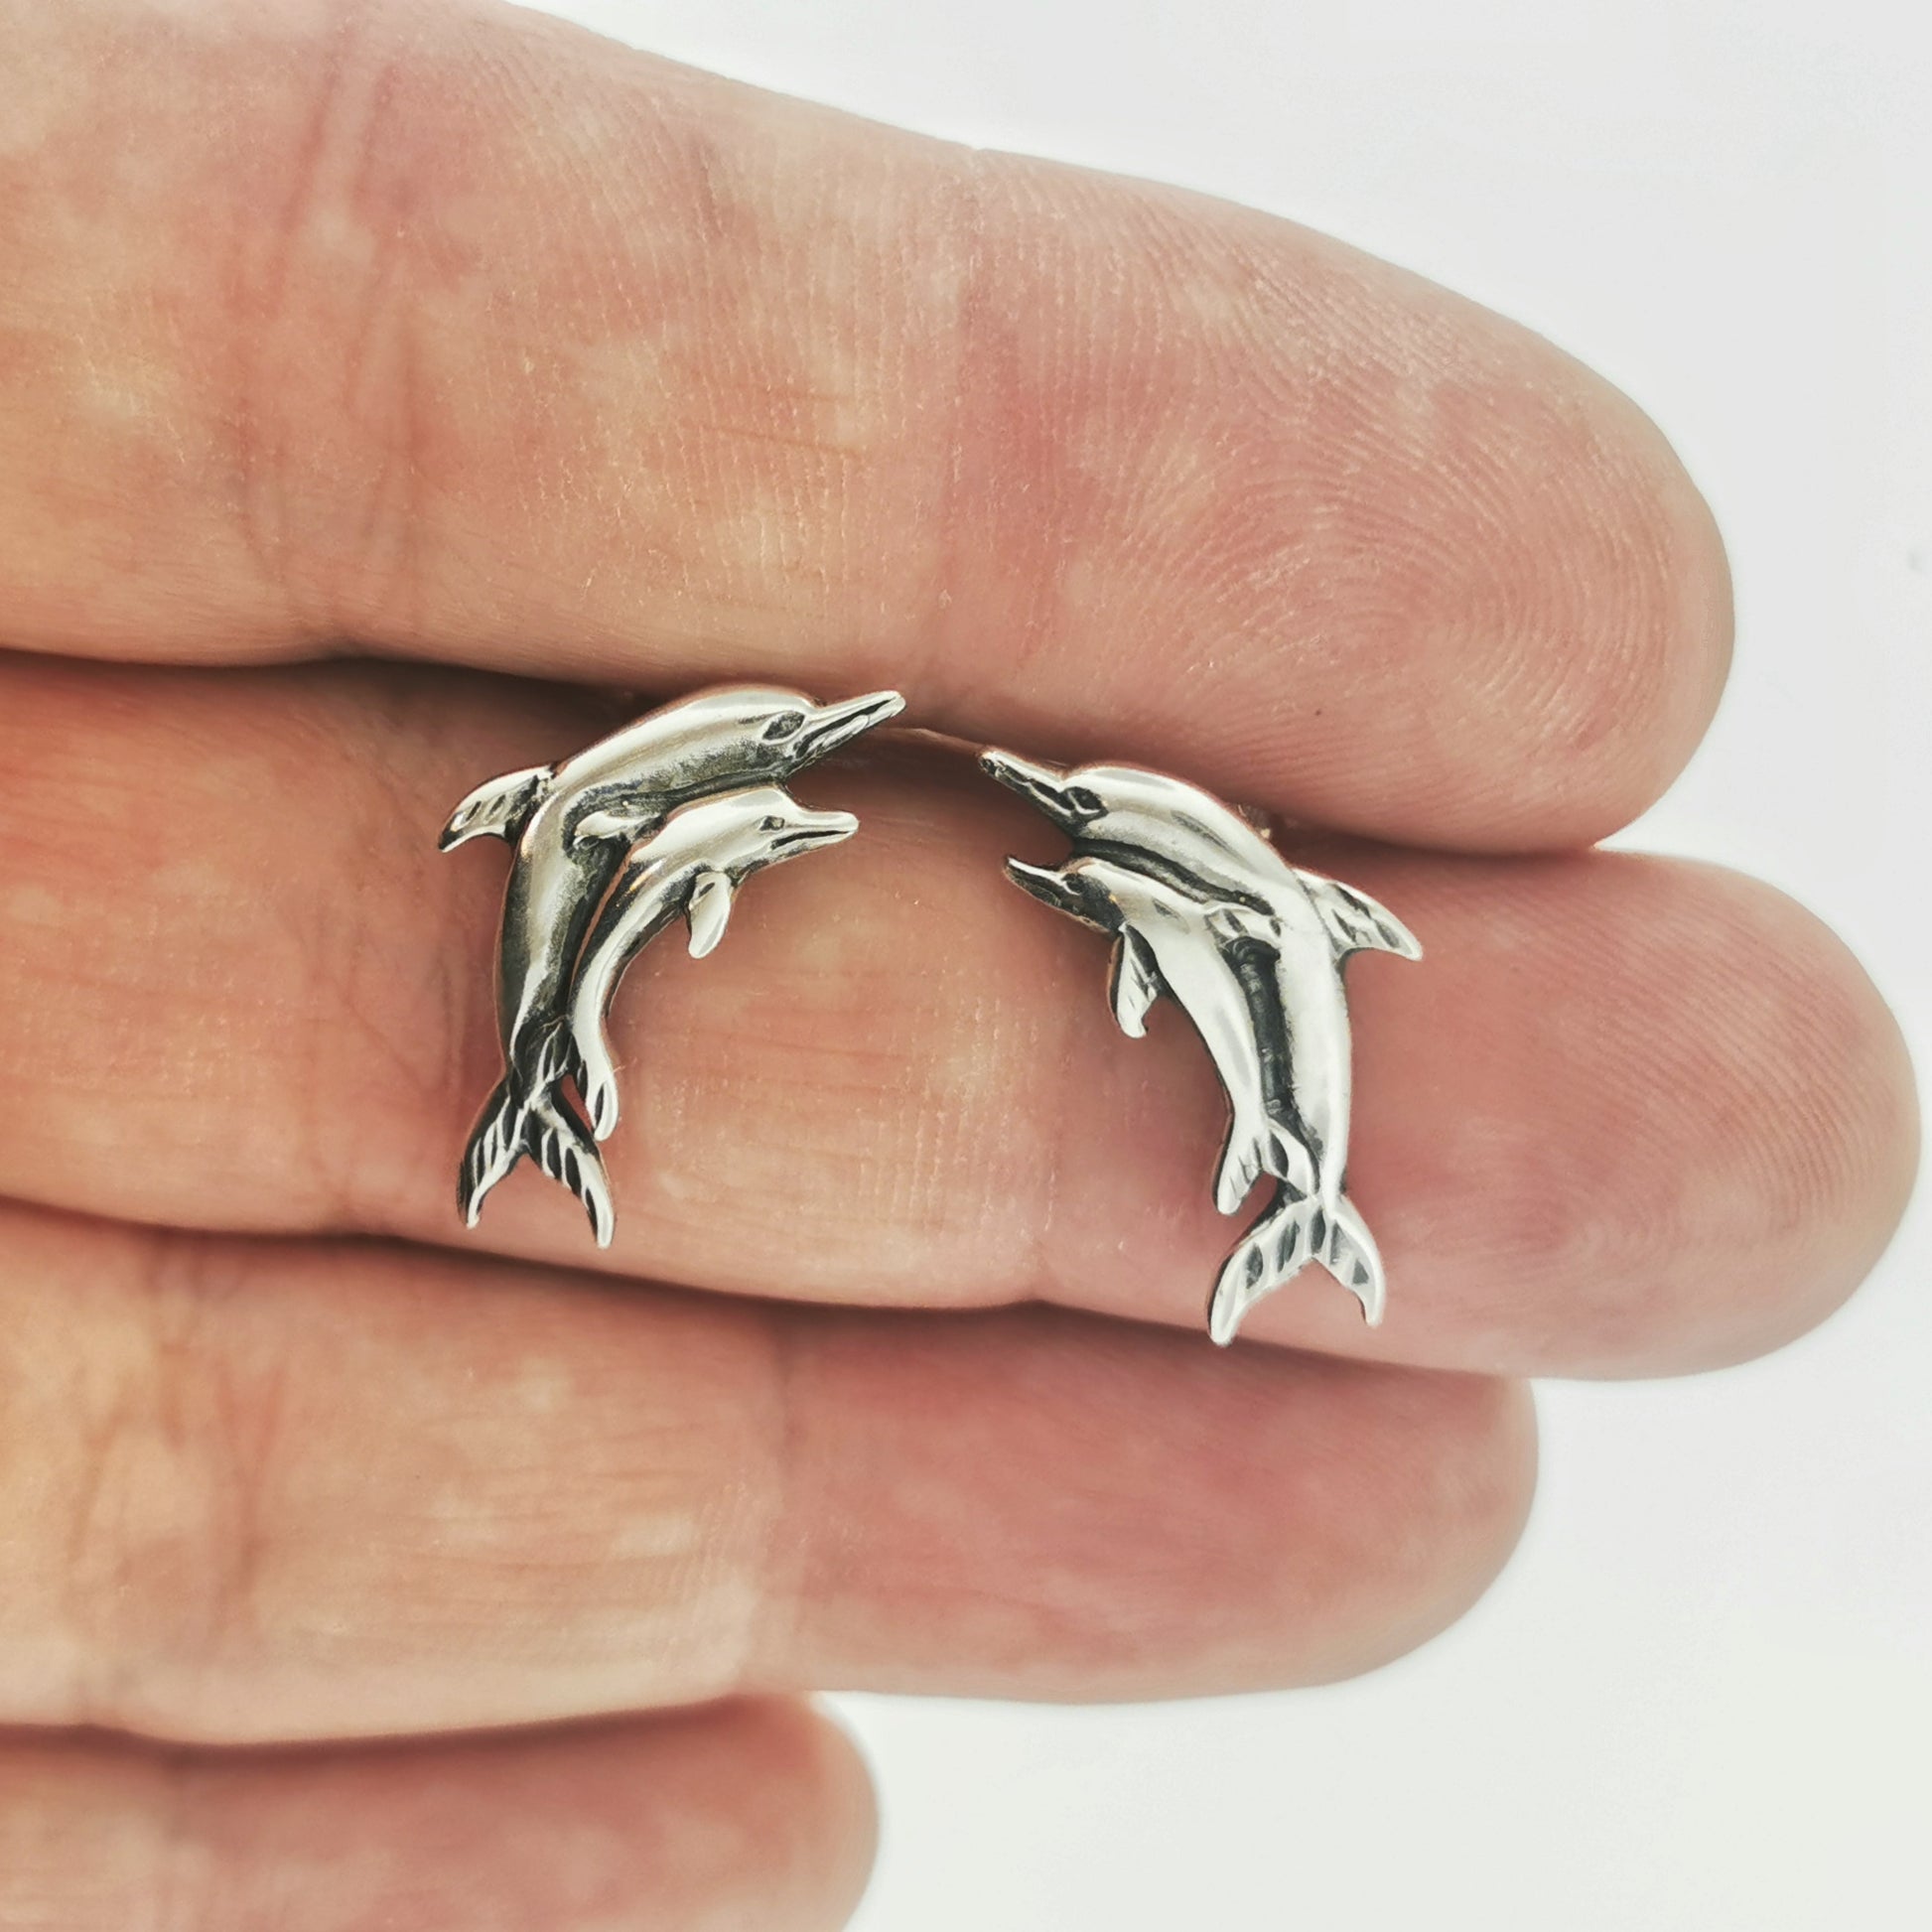 two dolphins stud earrings, dolphin stud earrings, silver dolphin studs, silver dolphin stud earrings, silver dolphin earrings, dolphin earrings, sterling silver dolphin earrings, silver dolphin jewelry, silver dolphin jewellery, dolphin lover jewelry, dolphin lover jewellery, cute dolphin earrings, porpoise earrings, silver porpoise earrings, porpoise jewelry, porpoise jewellery, silver stud earrings, silver studs, small silver earrings